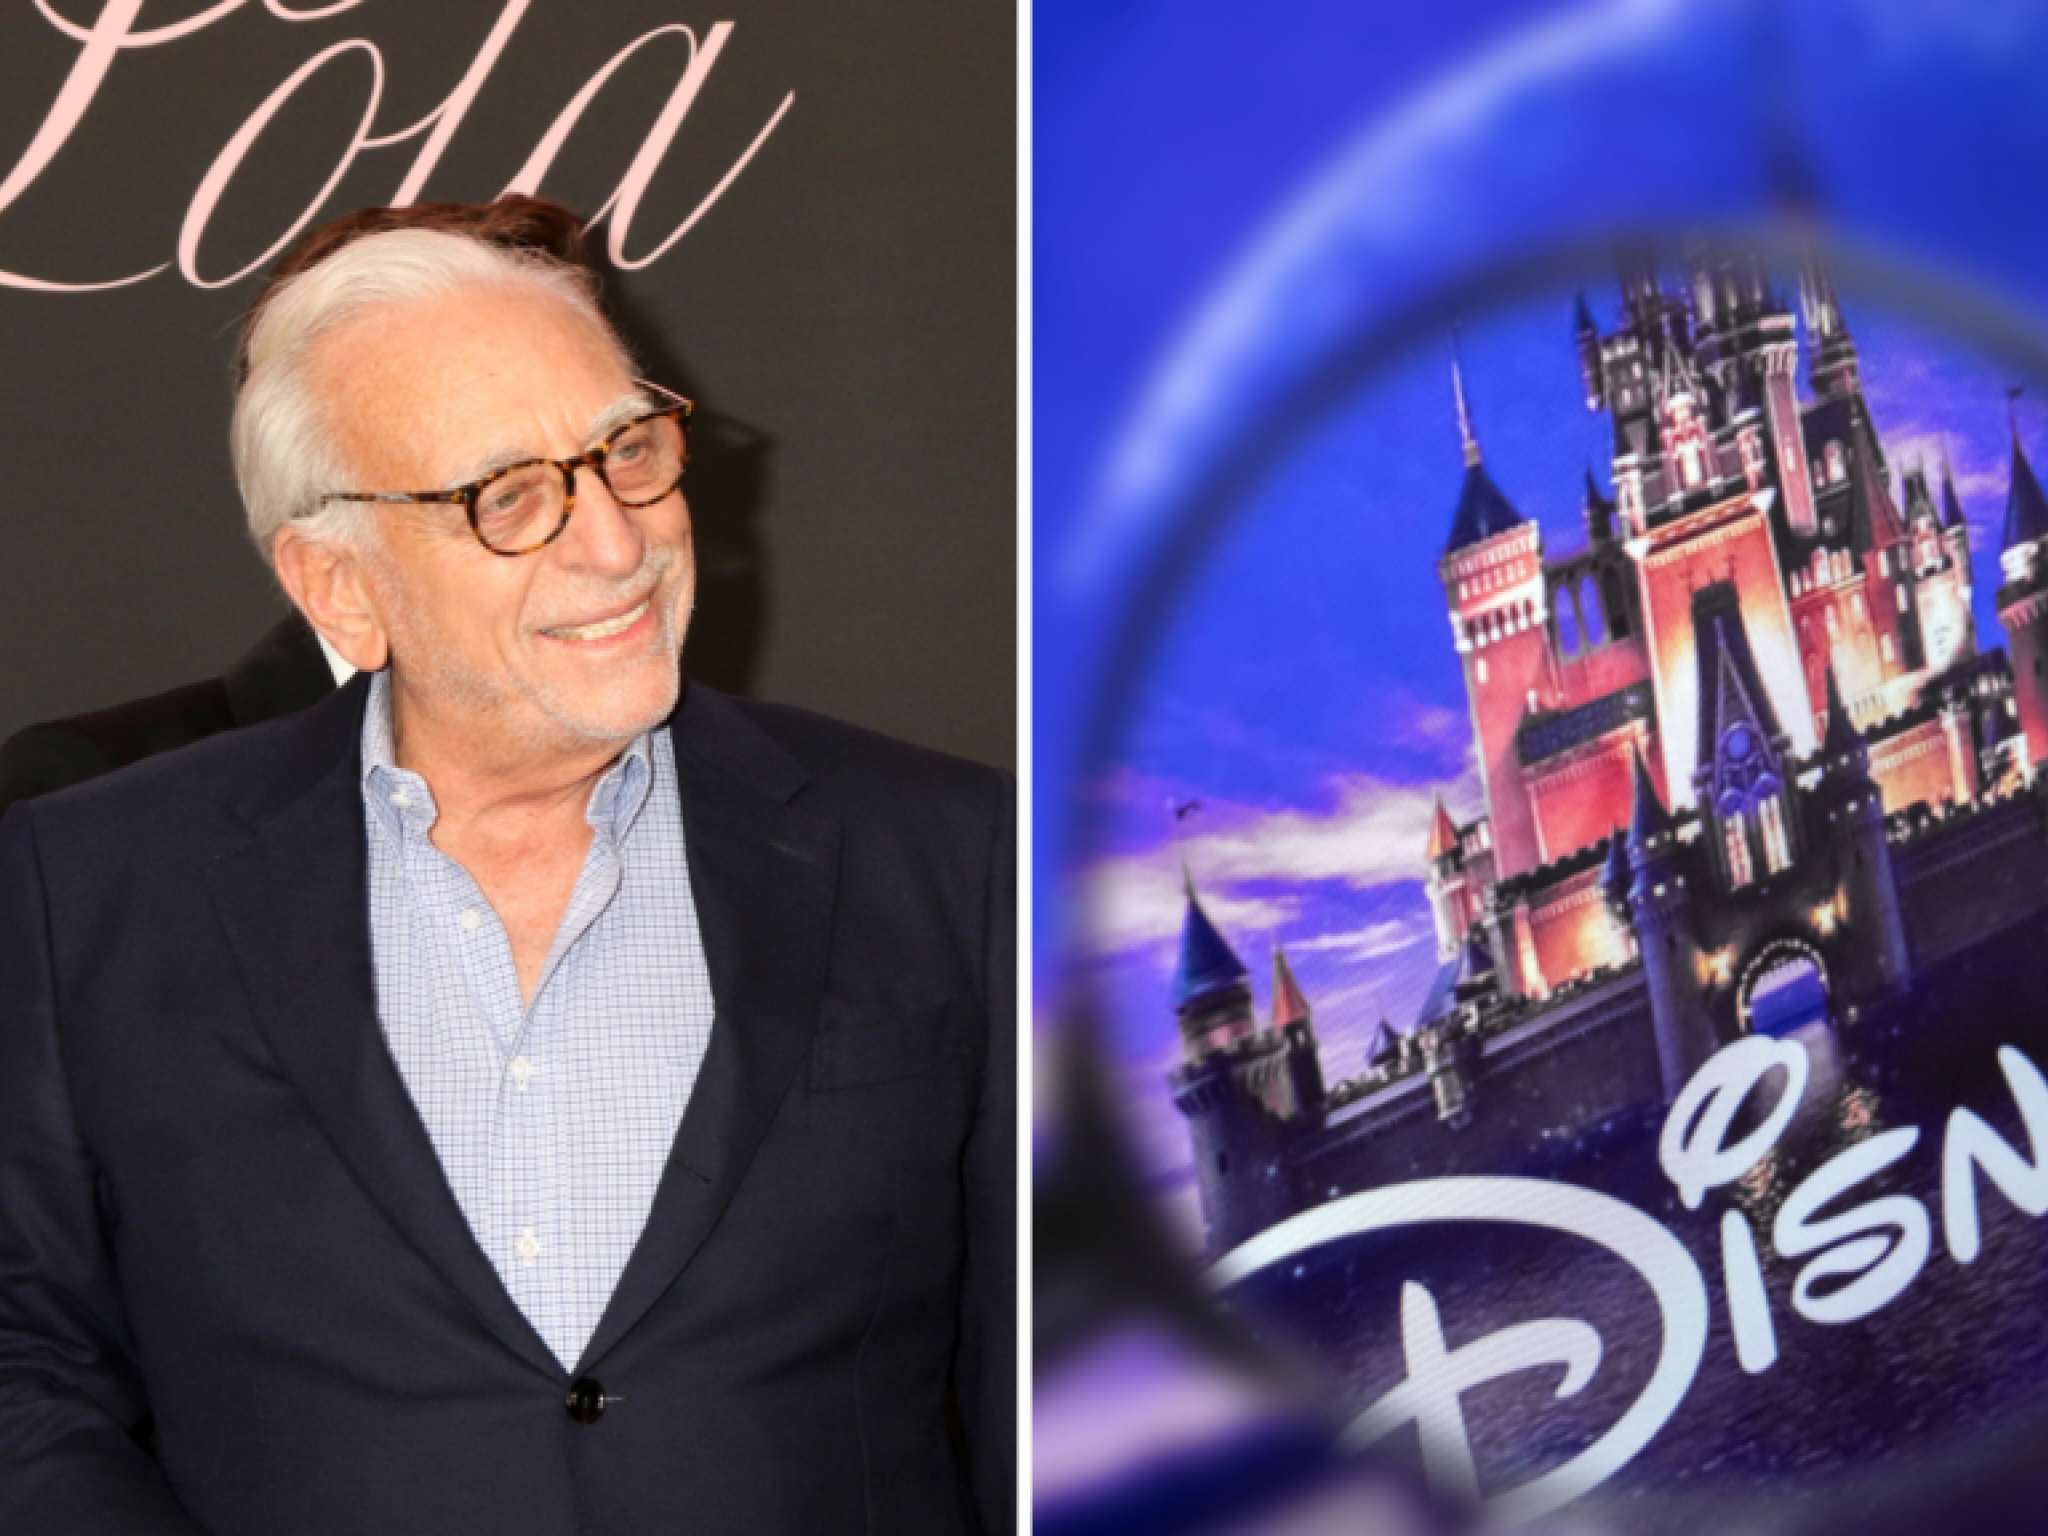  activist-investor-nelson-peltz-sells-entire-disney-stake-for-1b-after-losing-proxy-battle 